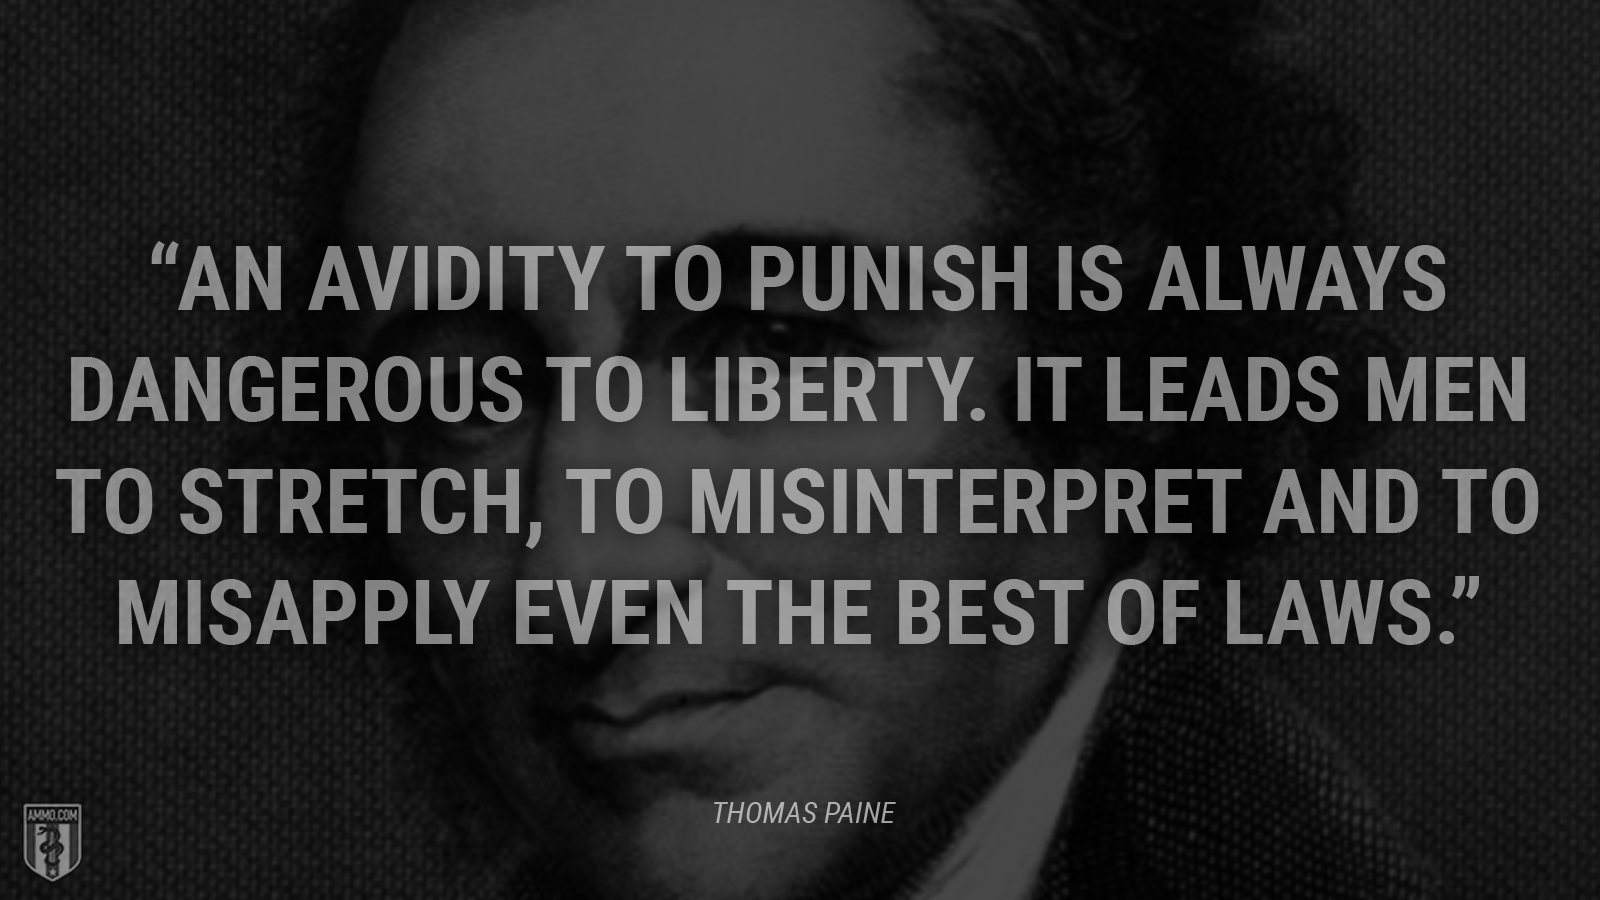 “An avidity to punish is always dangerous to liberty. It leads men to stretch, to misinterpret and to misapply even the best of laws.” - Thomas Paine